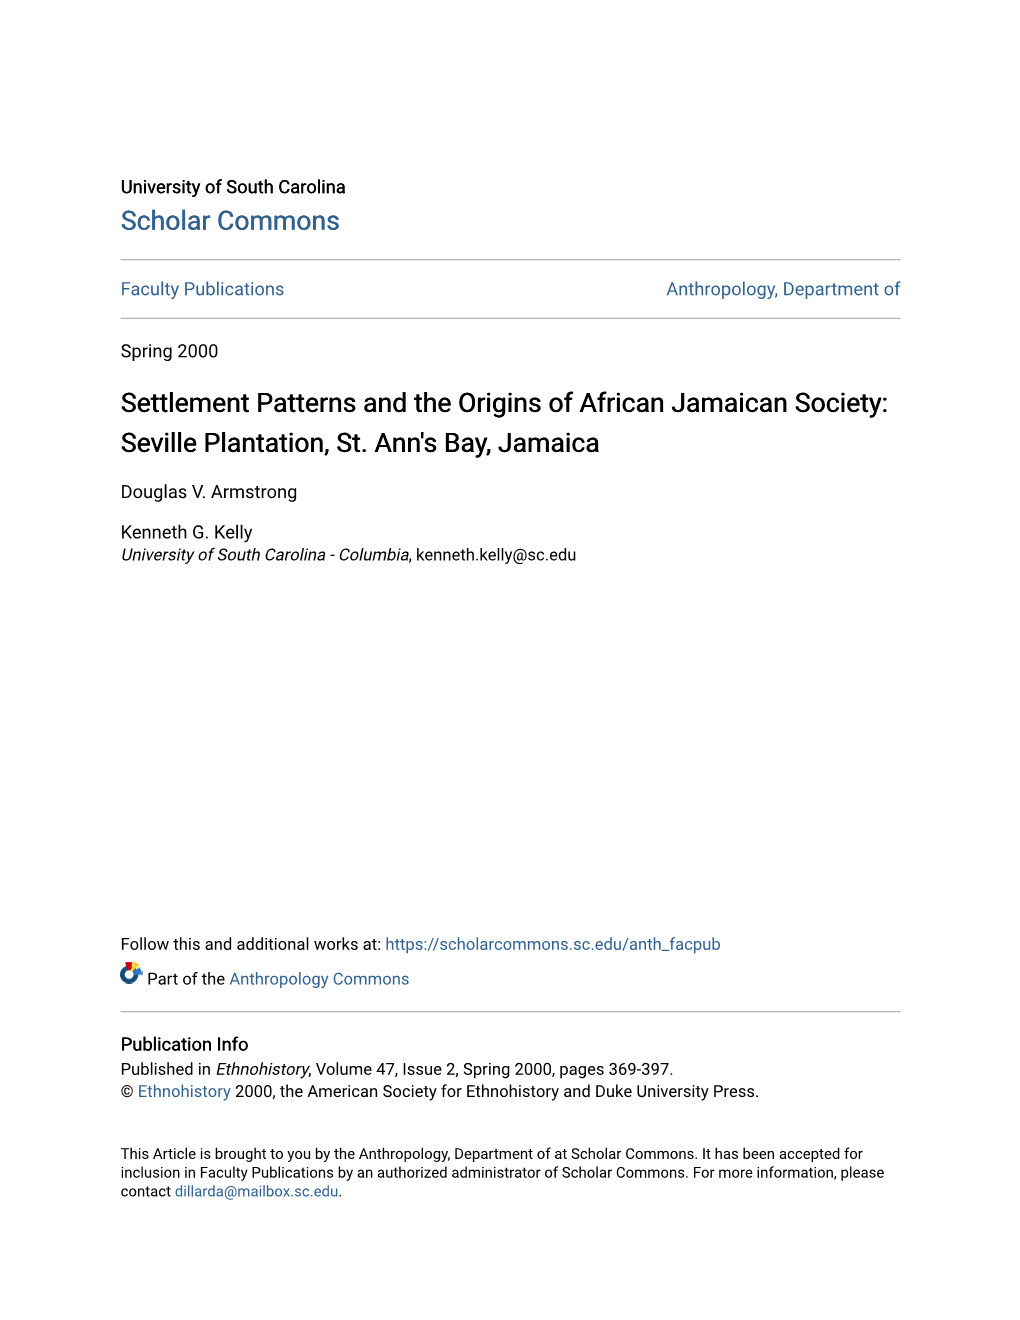 Settlement Patterns and the Origins of African Jamaican Society: Seville Plantation, St. Ann's Bay, Jamaica